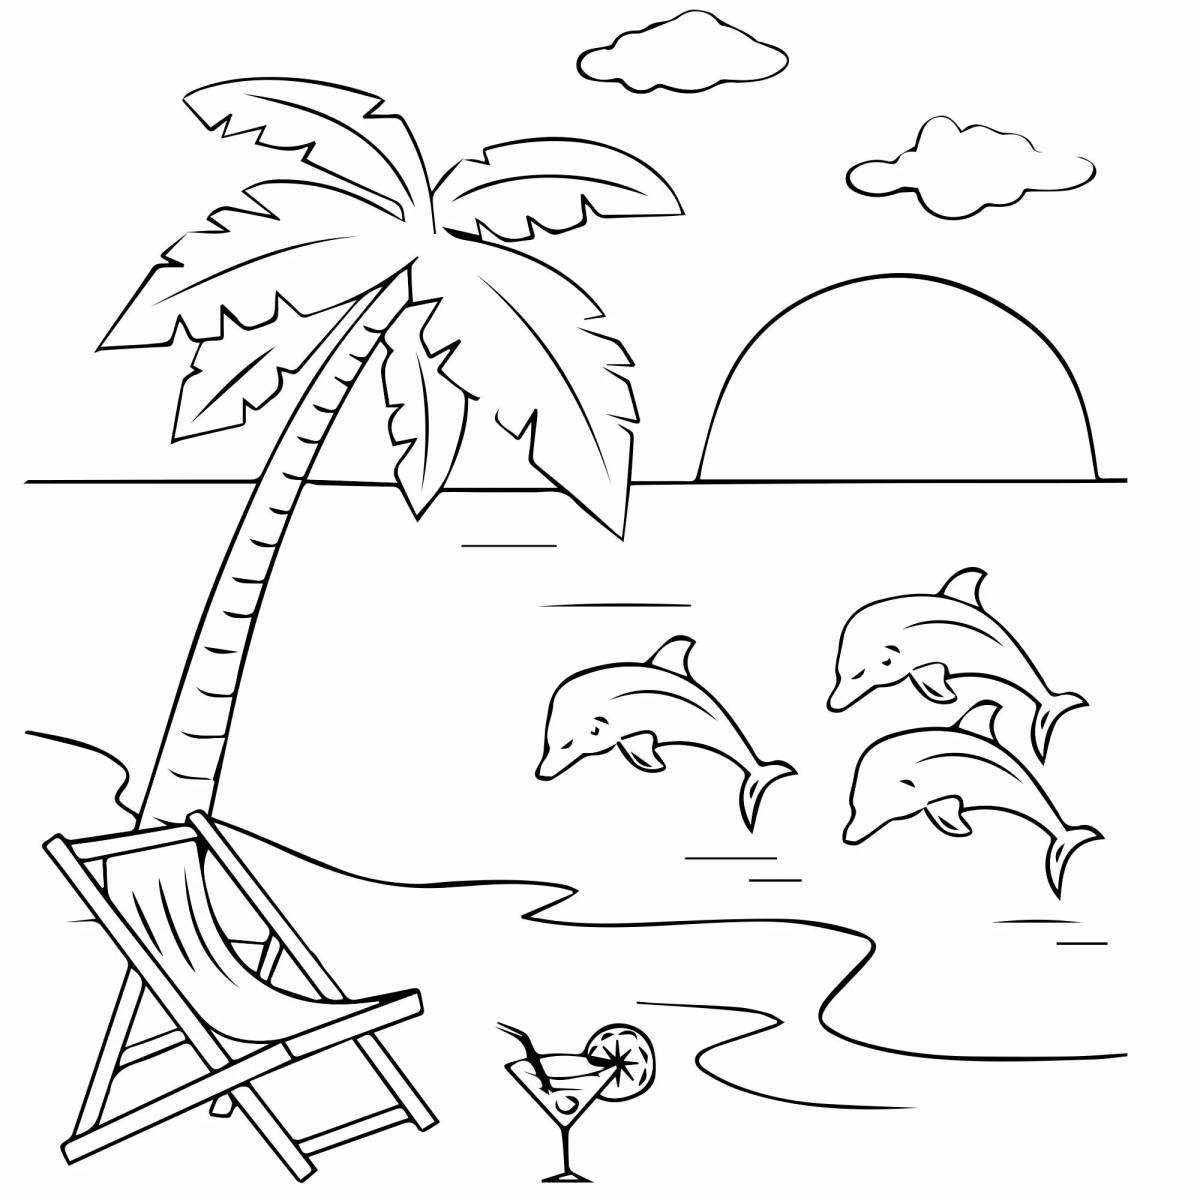 Coloring page cheerful sea beach